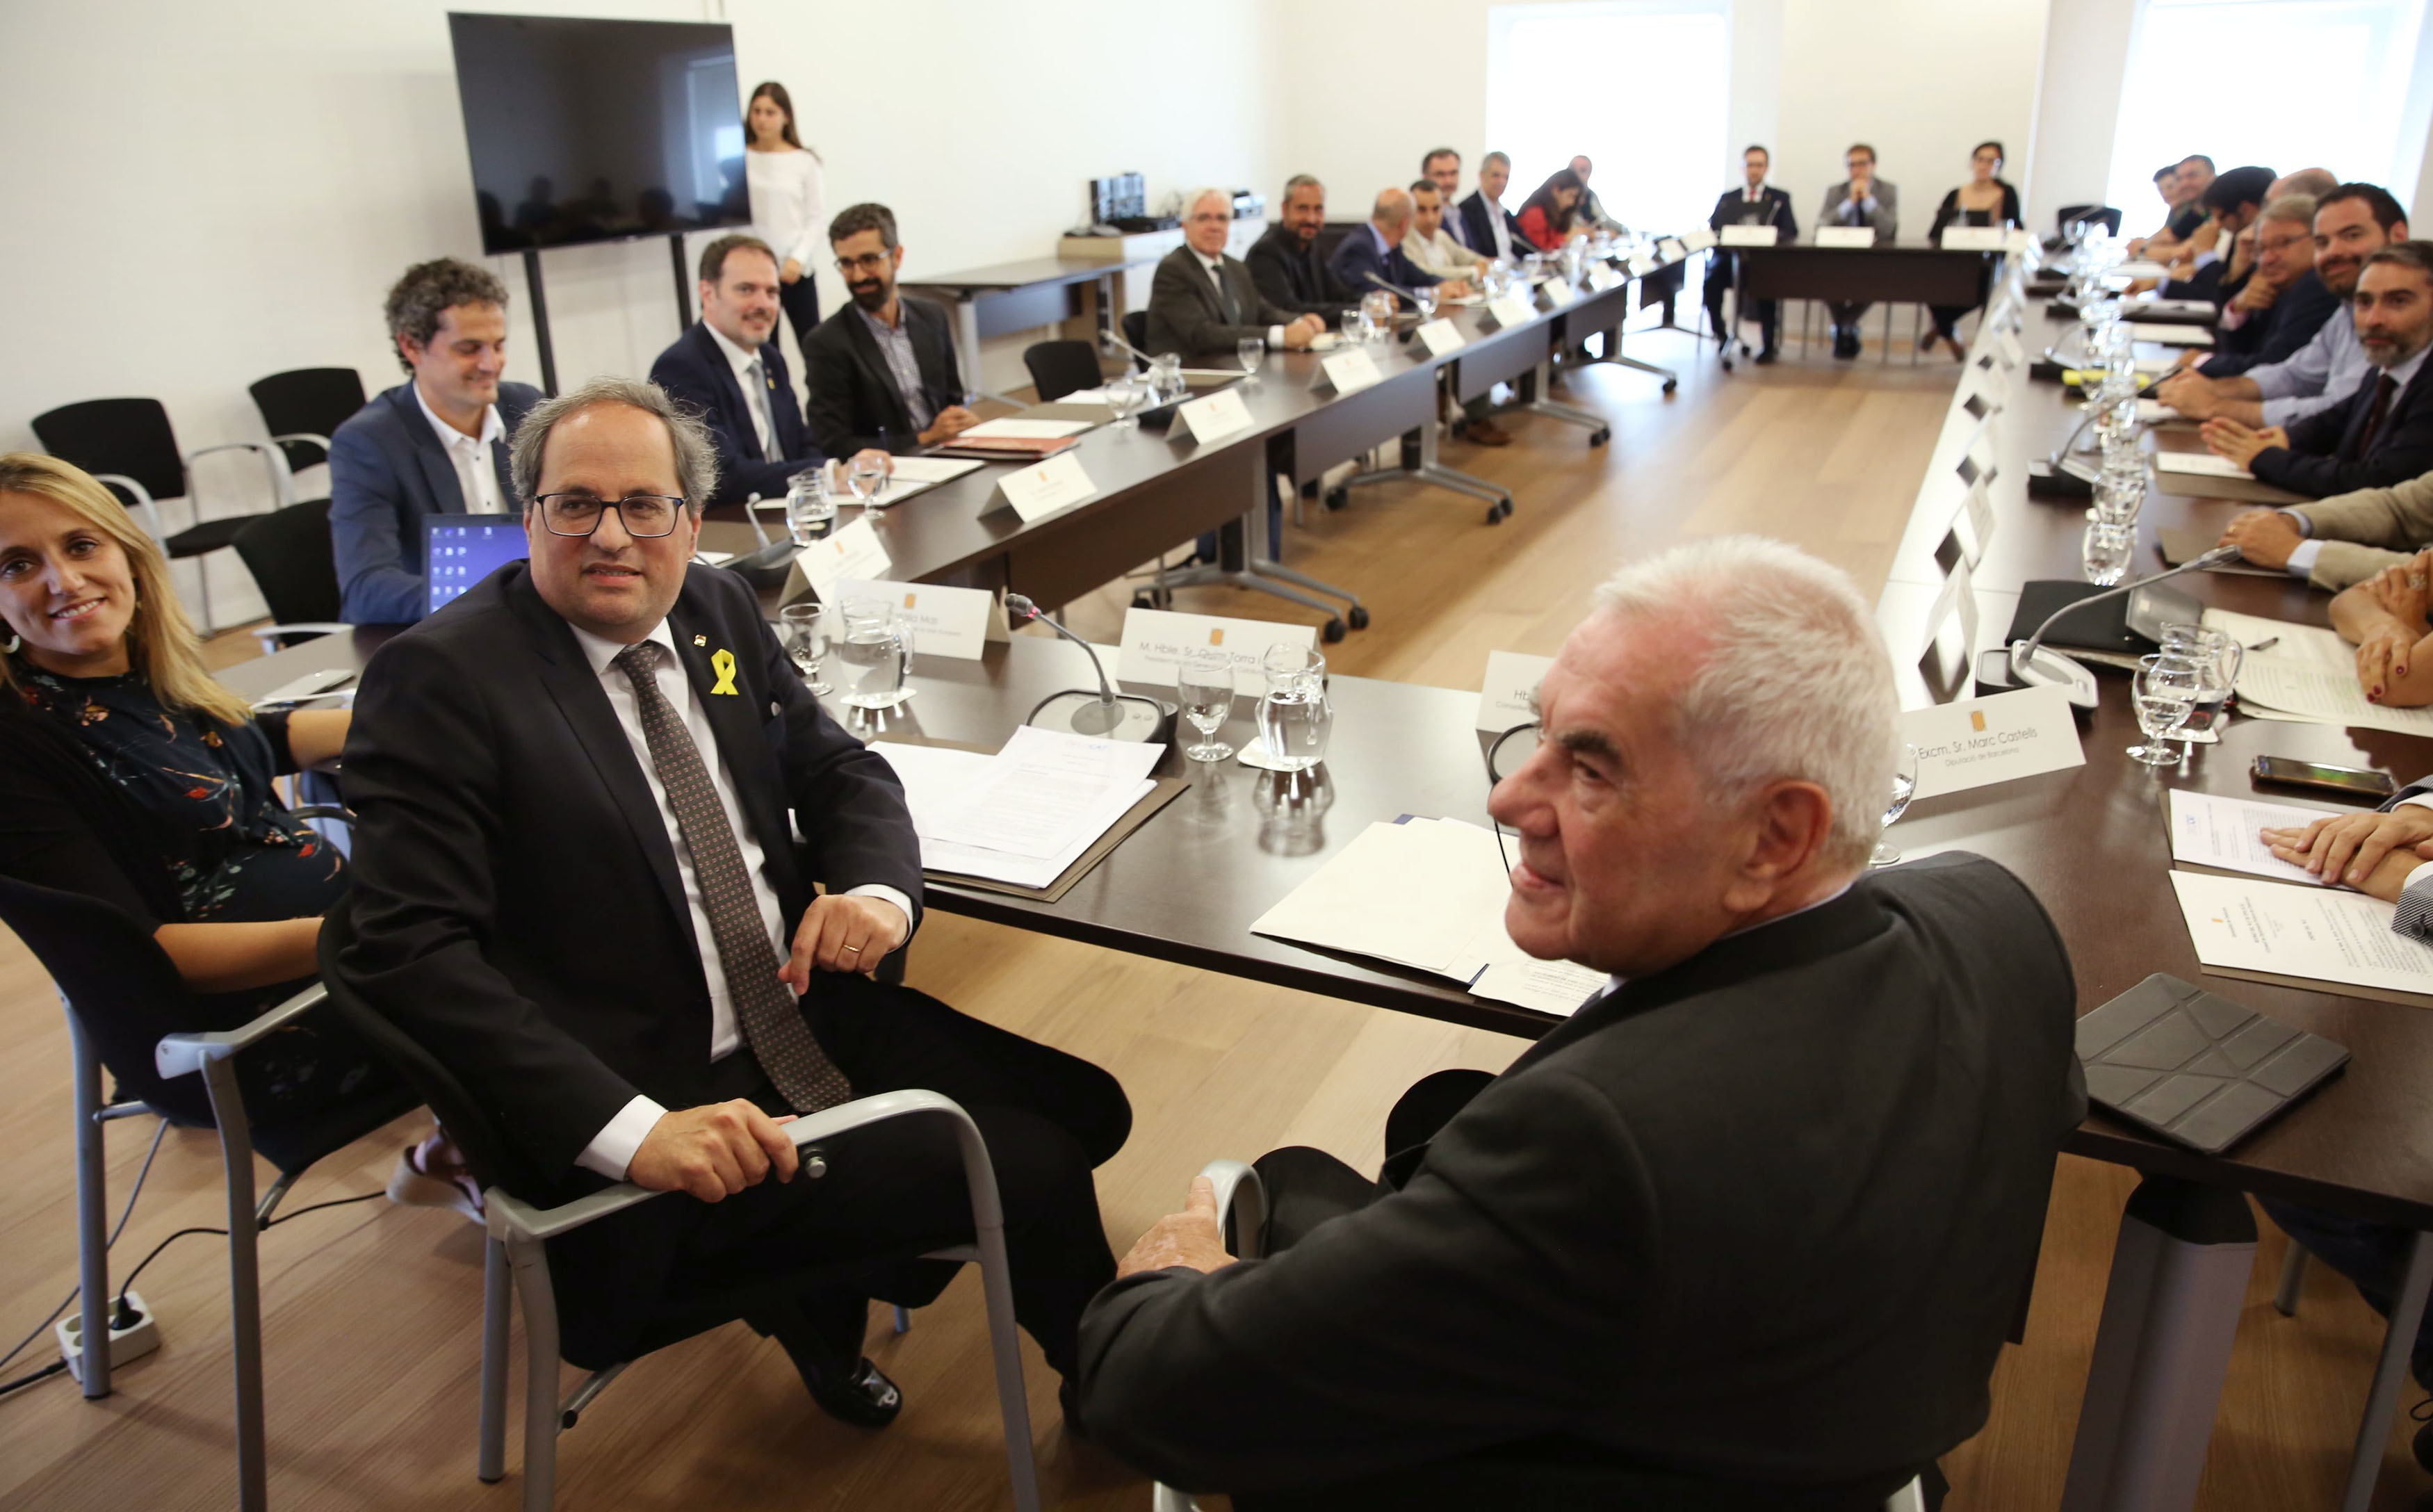 The Catalan president, Quim Torra, and the Foreign Affairs minister, Ernest Maragall, in the meeting to reopen the Diplocat (by Jordi Bedmar)